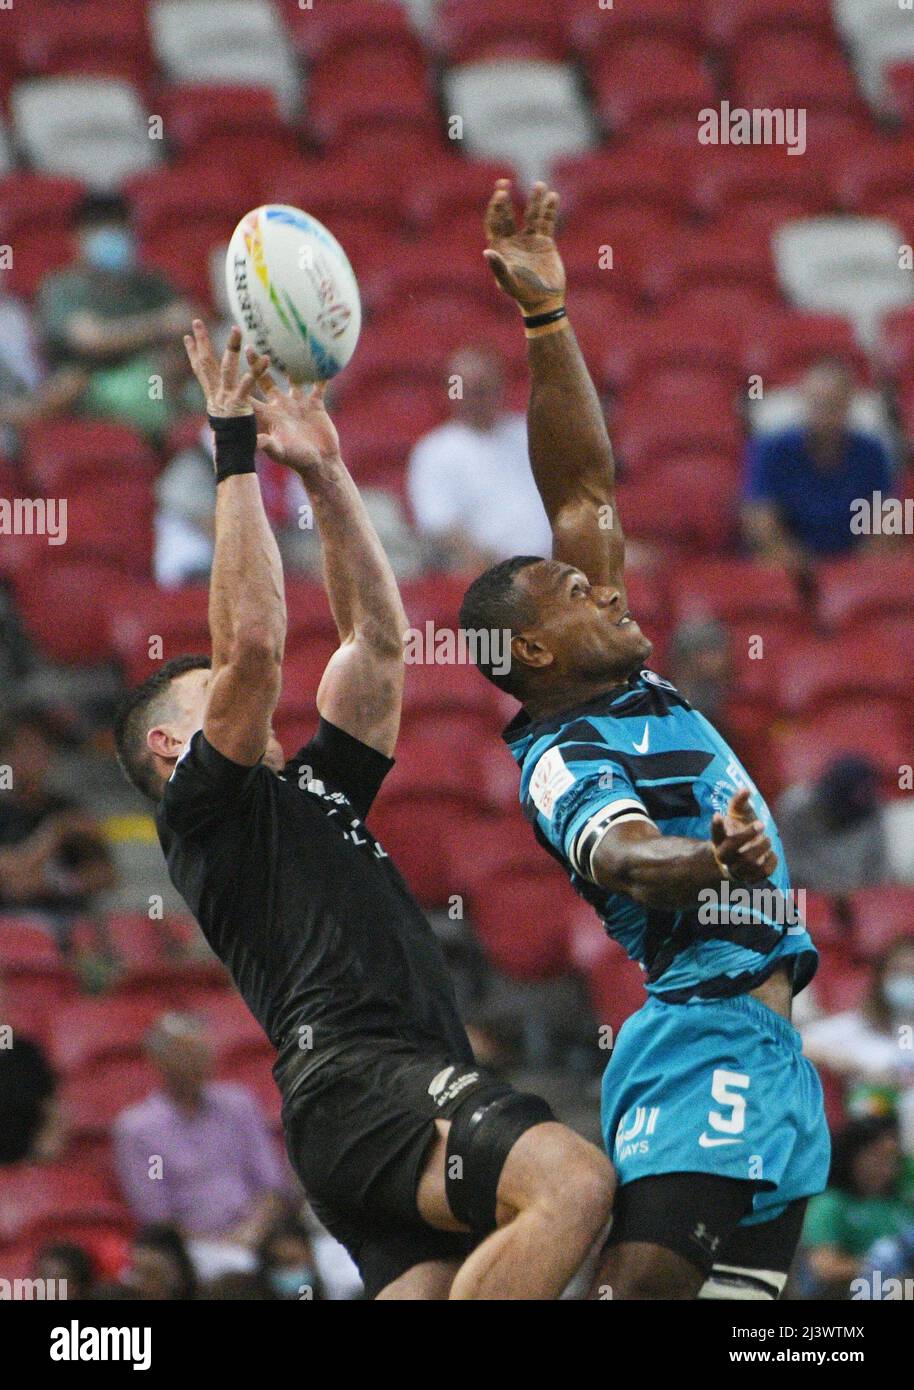 Singapore. 10th Apr, 2022. Elia Canakaivata (R) of Fiji competes with Sam Dickson of New Zealand during the final at the HSBC World Rugby Sevens Singapore stop, held in the National Stadium on April 10, 2022. Credit: Then Chih Wey/Xinhua/Alamy Live News Stock Photo